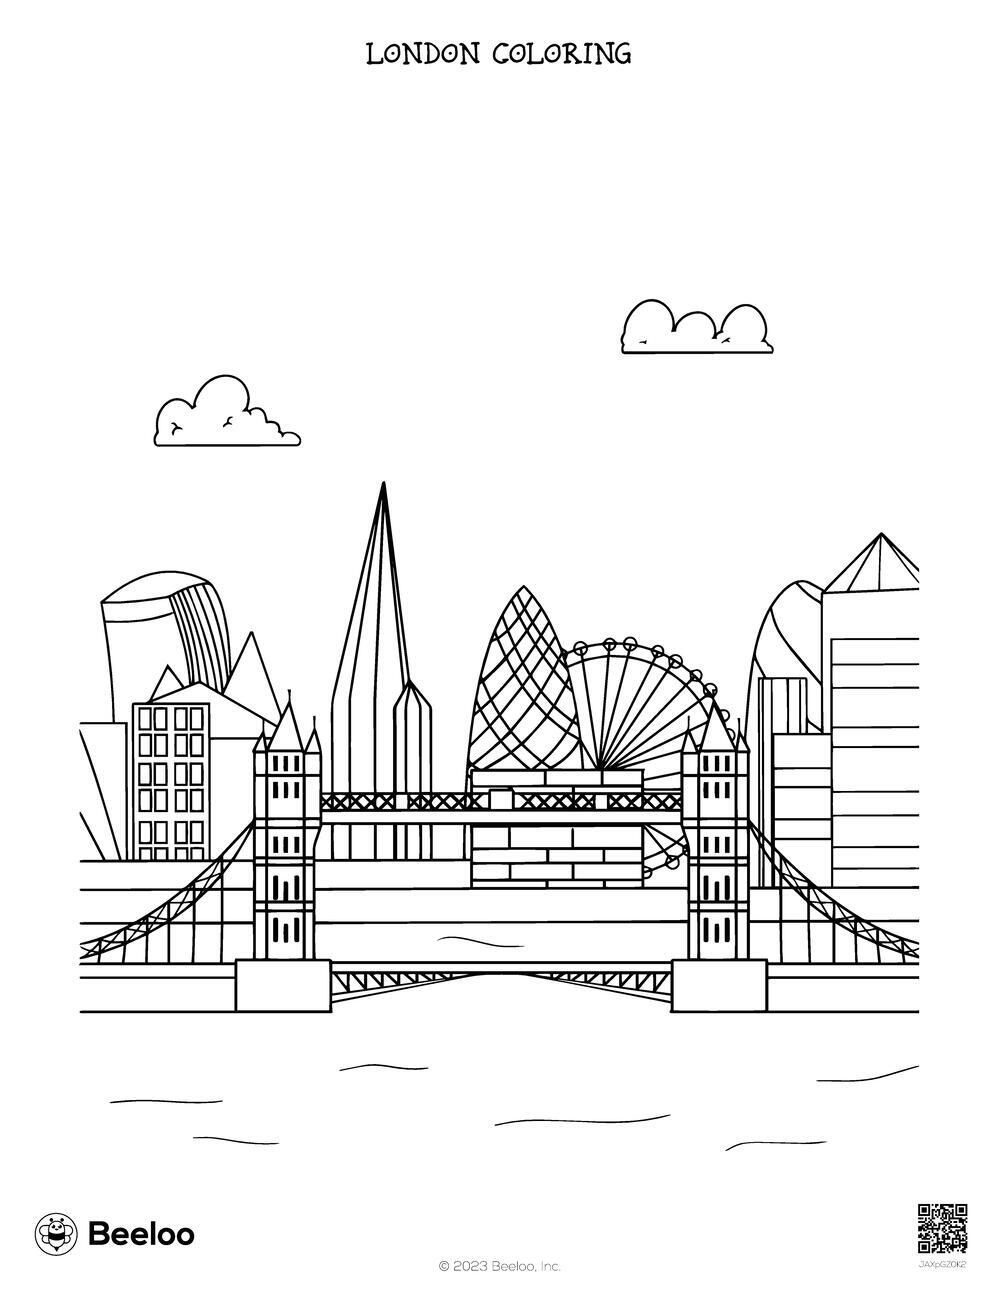 London coloring â printable crafts and activities for kids